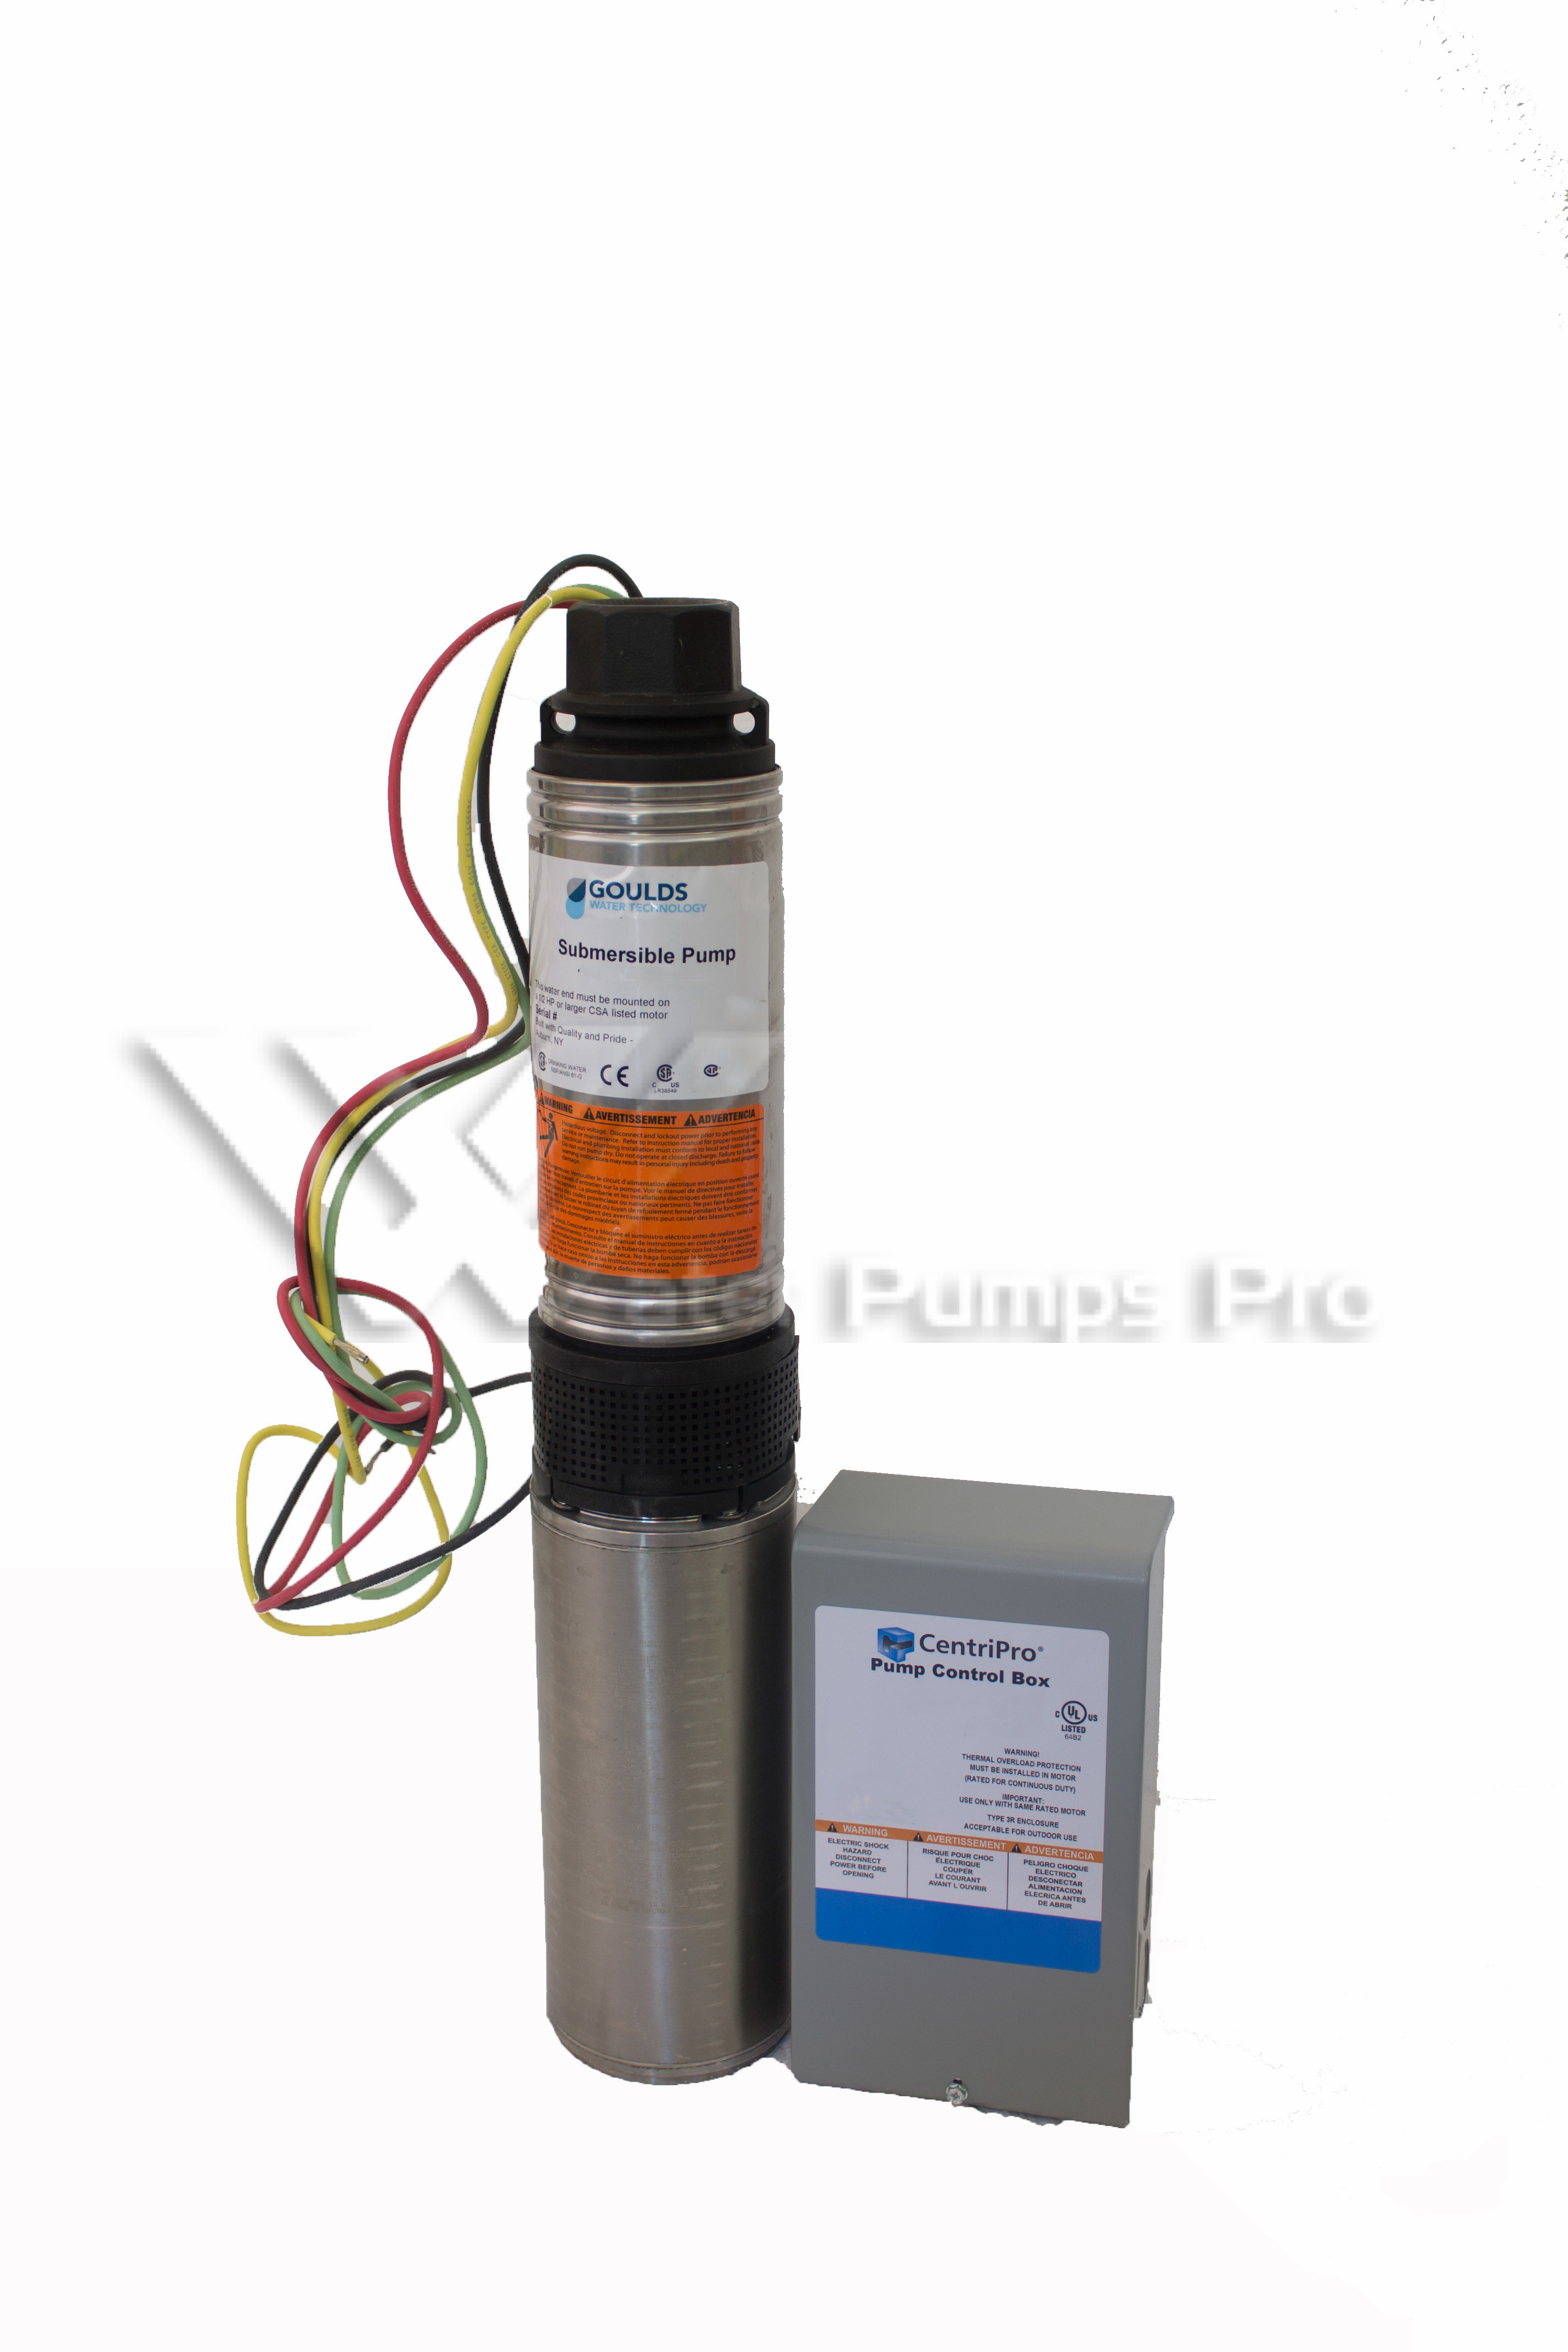 Goulds 18HS10412C Submersible Water Well Pump 1HP 230V 3Wire